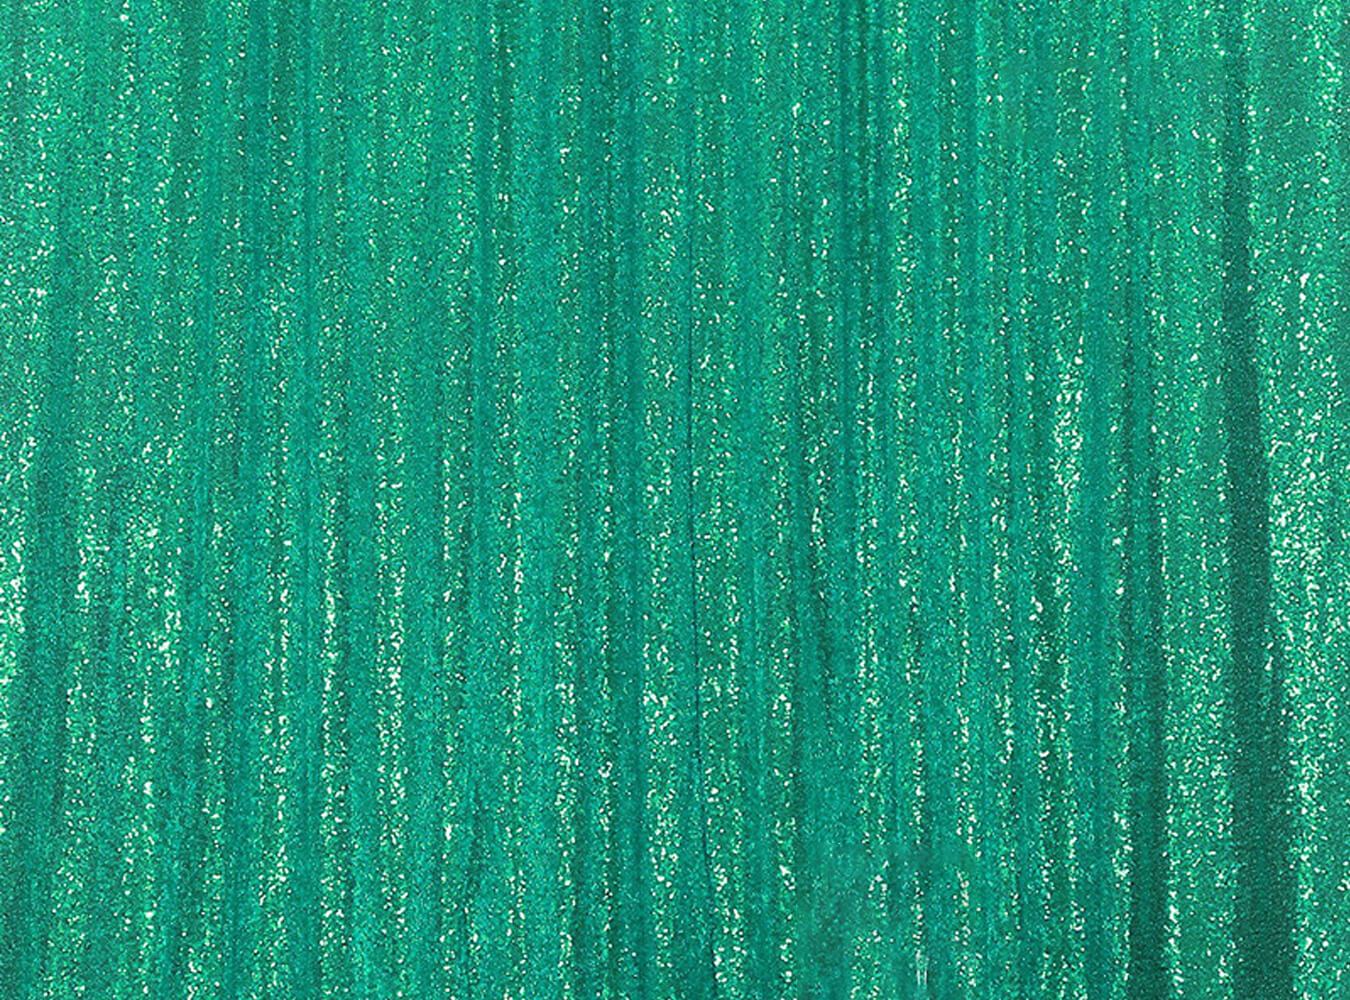 Backdrops Prop Sequin Fabric Mermaid Sequin Fabric Stretchy Sequin